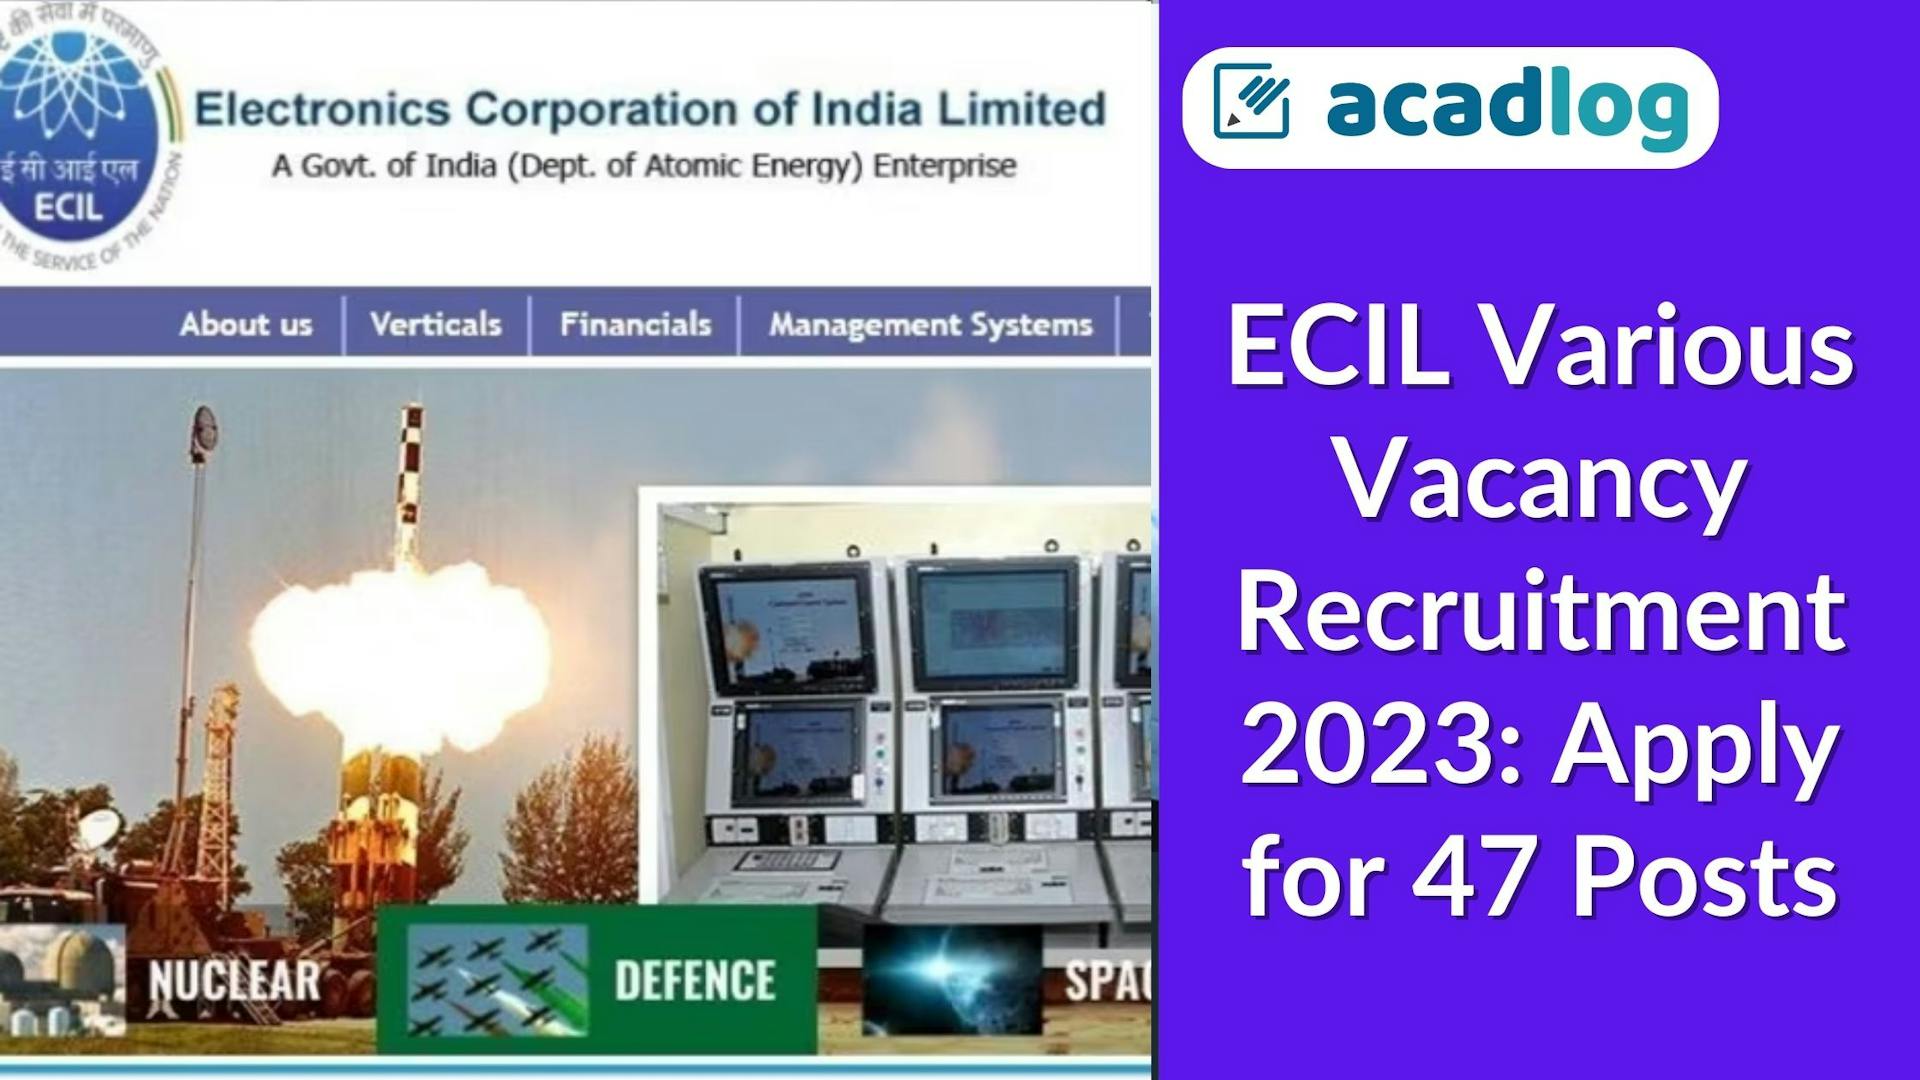 ECIL Various Vacancy Recruitment 2023: Apply for 47 Posts